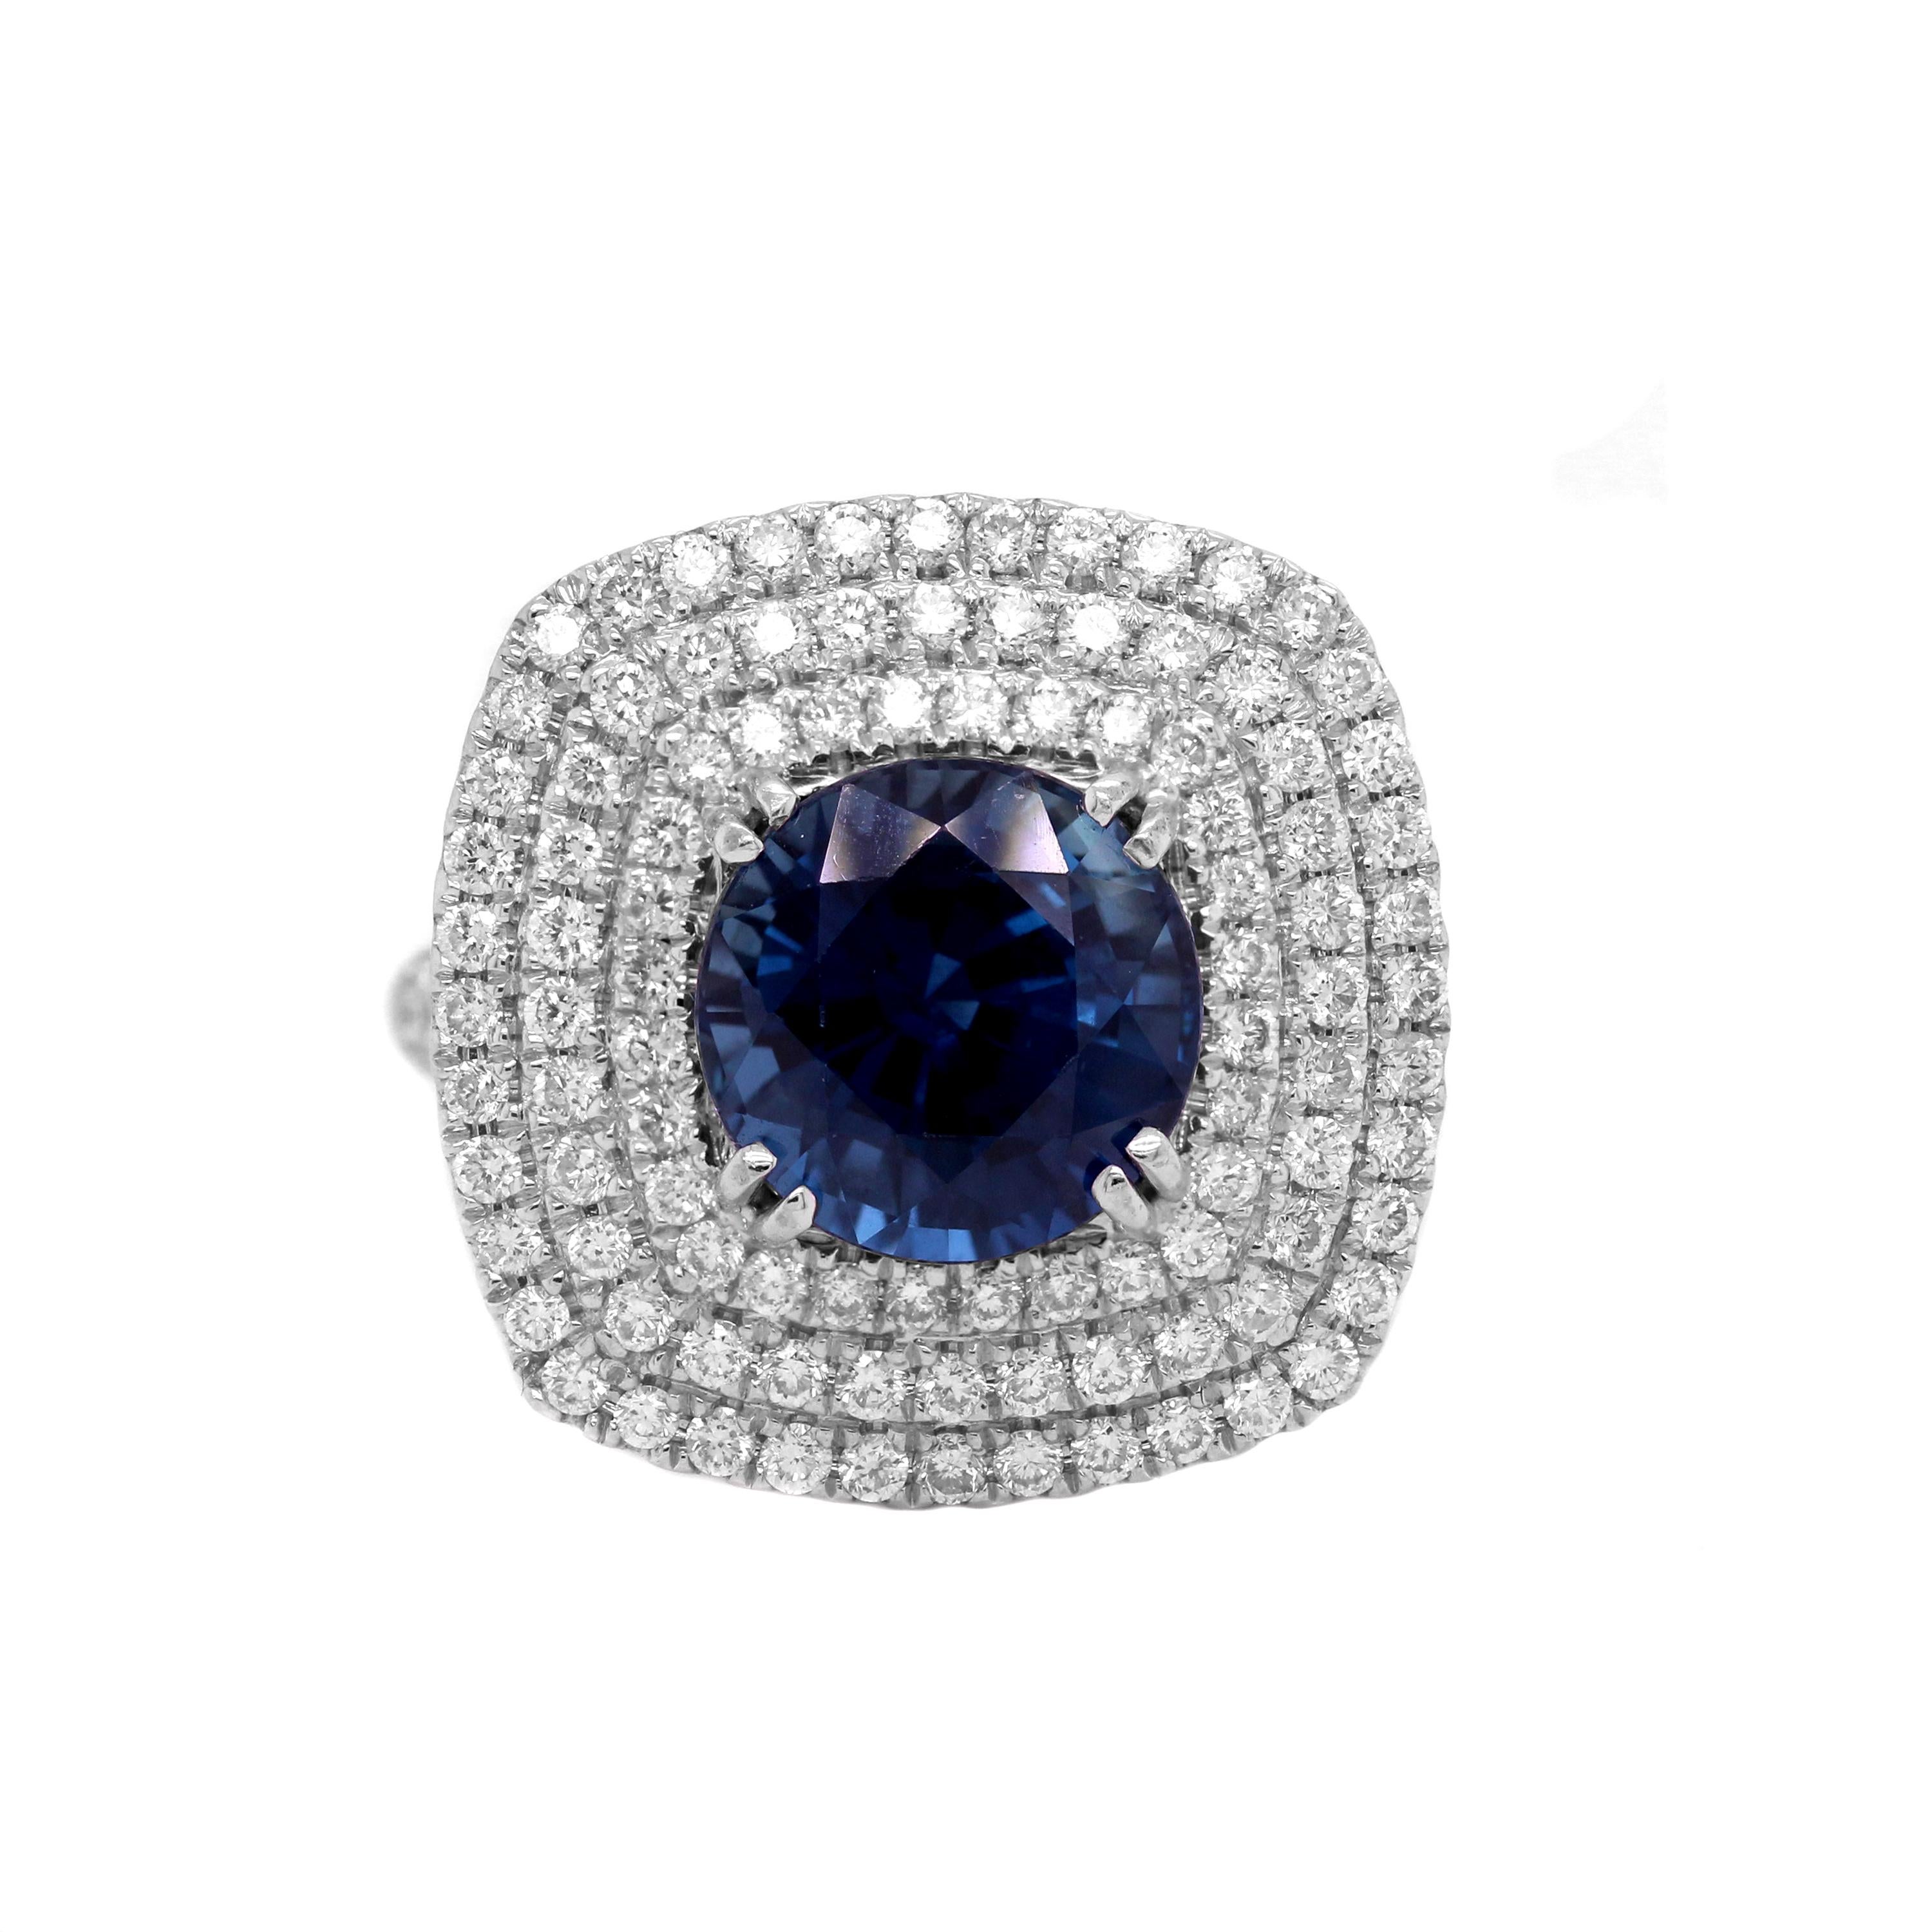 14K White Gold and Diamond Cocktail Ring with No Heat GIA Certified Blue Sapphire center

5.42 carat GIA Certified Round Blue Sapphire No Heat
GIA Report #: 1206379471
Sapphire Measures 9.75 x 9.81 x 7.29 mm
Origin: Thailand
NO HEAT

Apprx. 2 carat